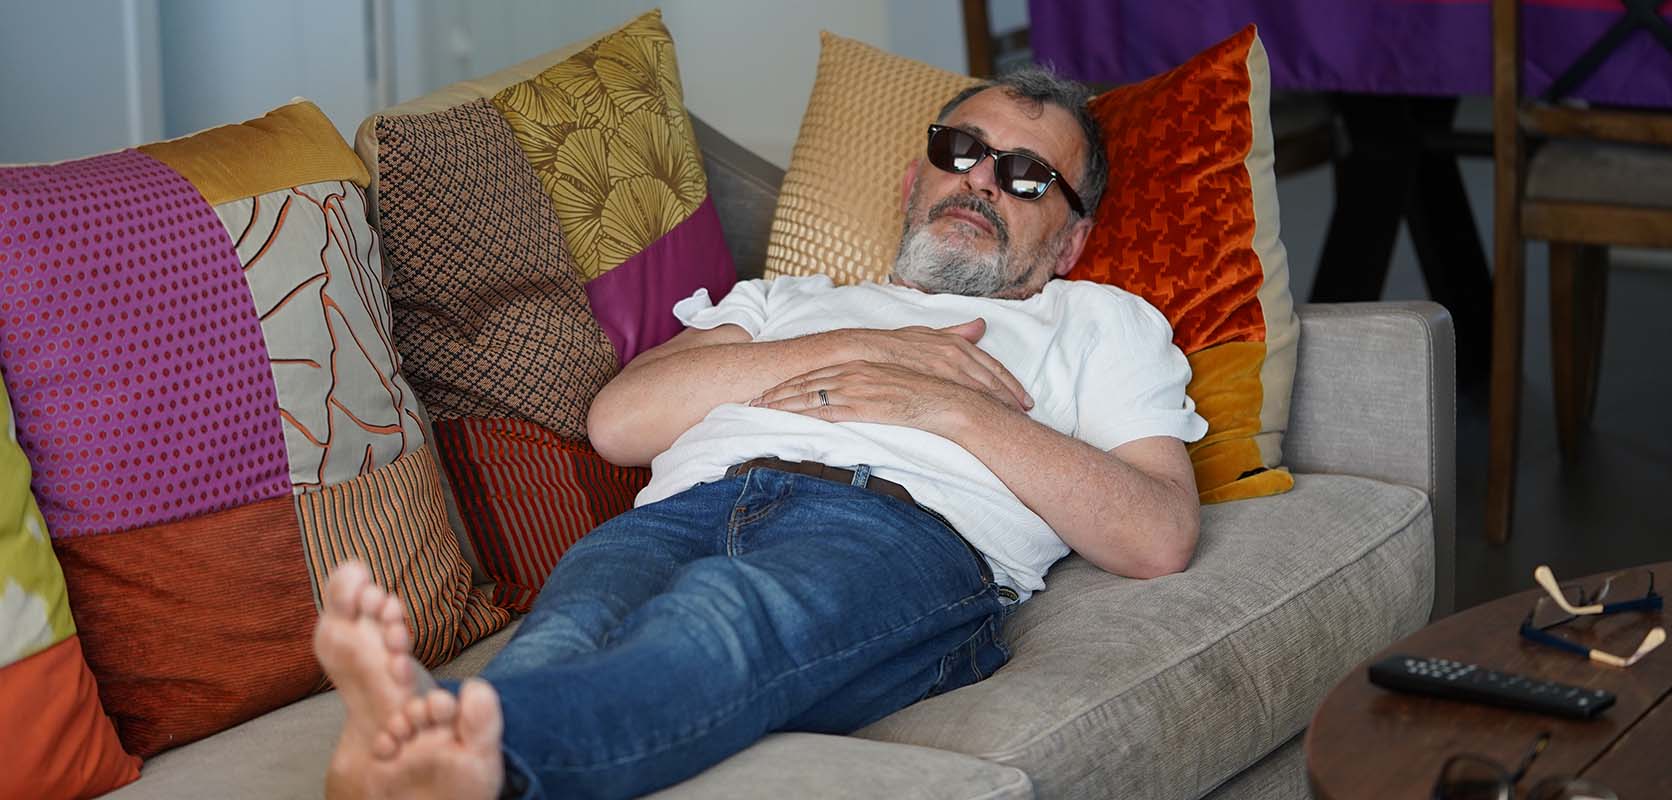 Adult man relaxing with couch lock after buying weed online